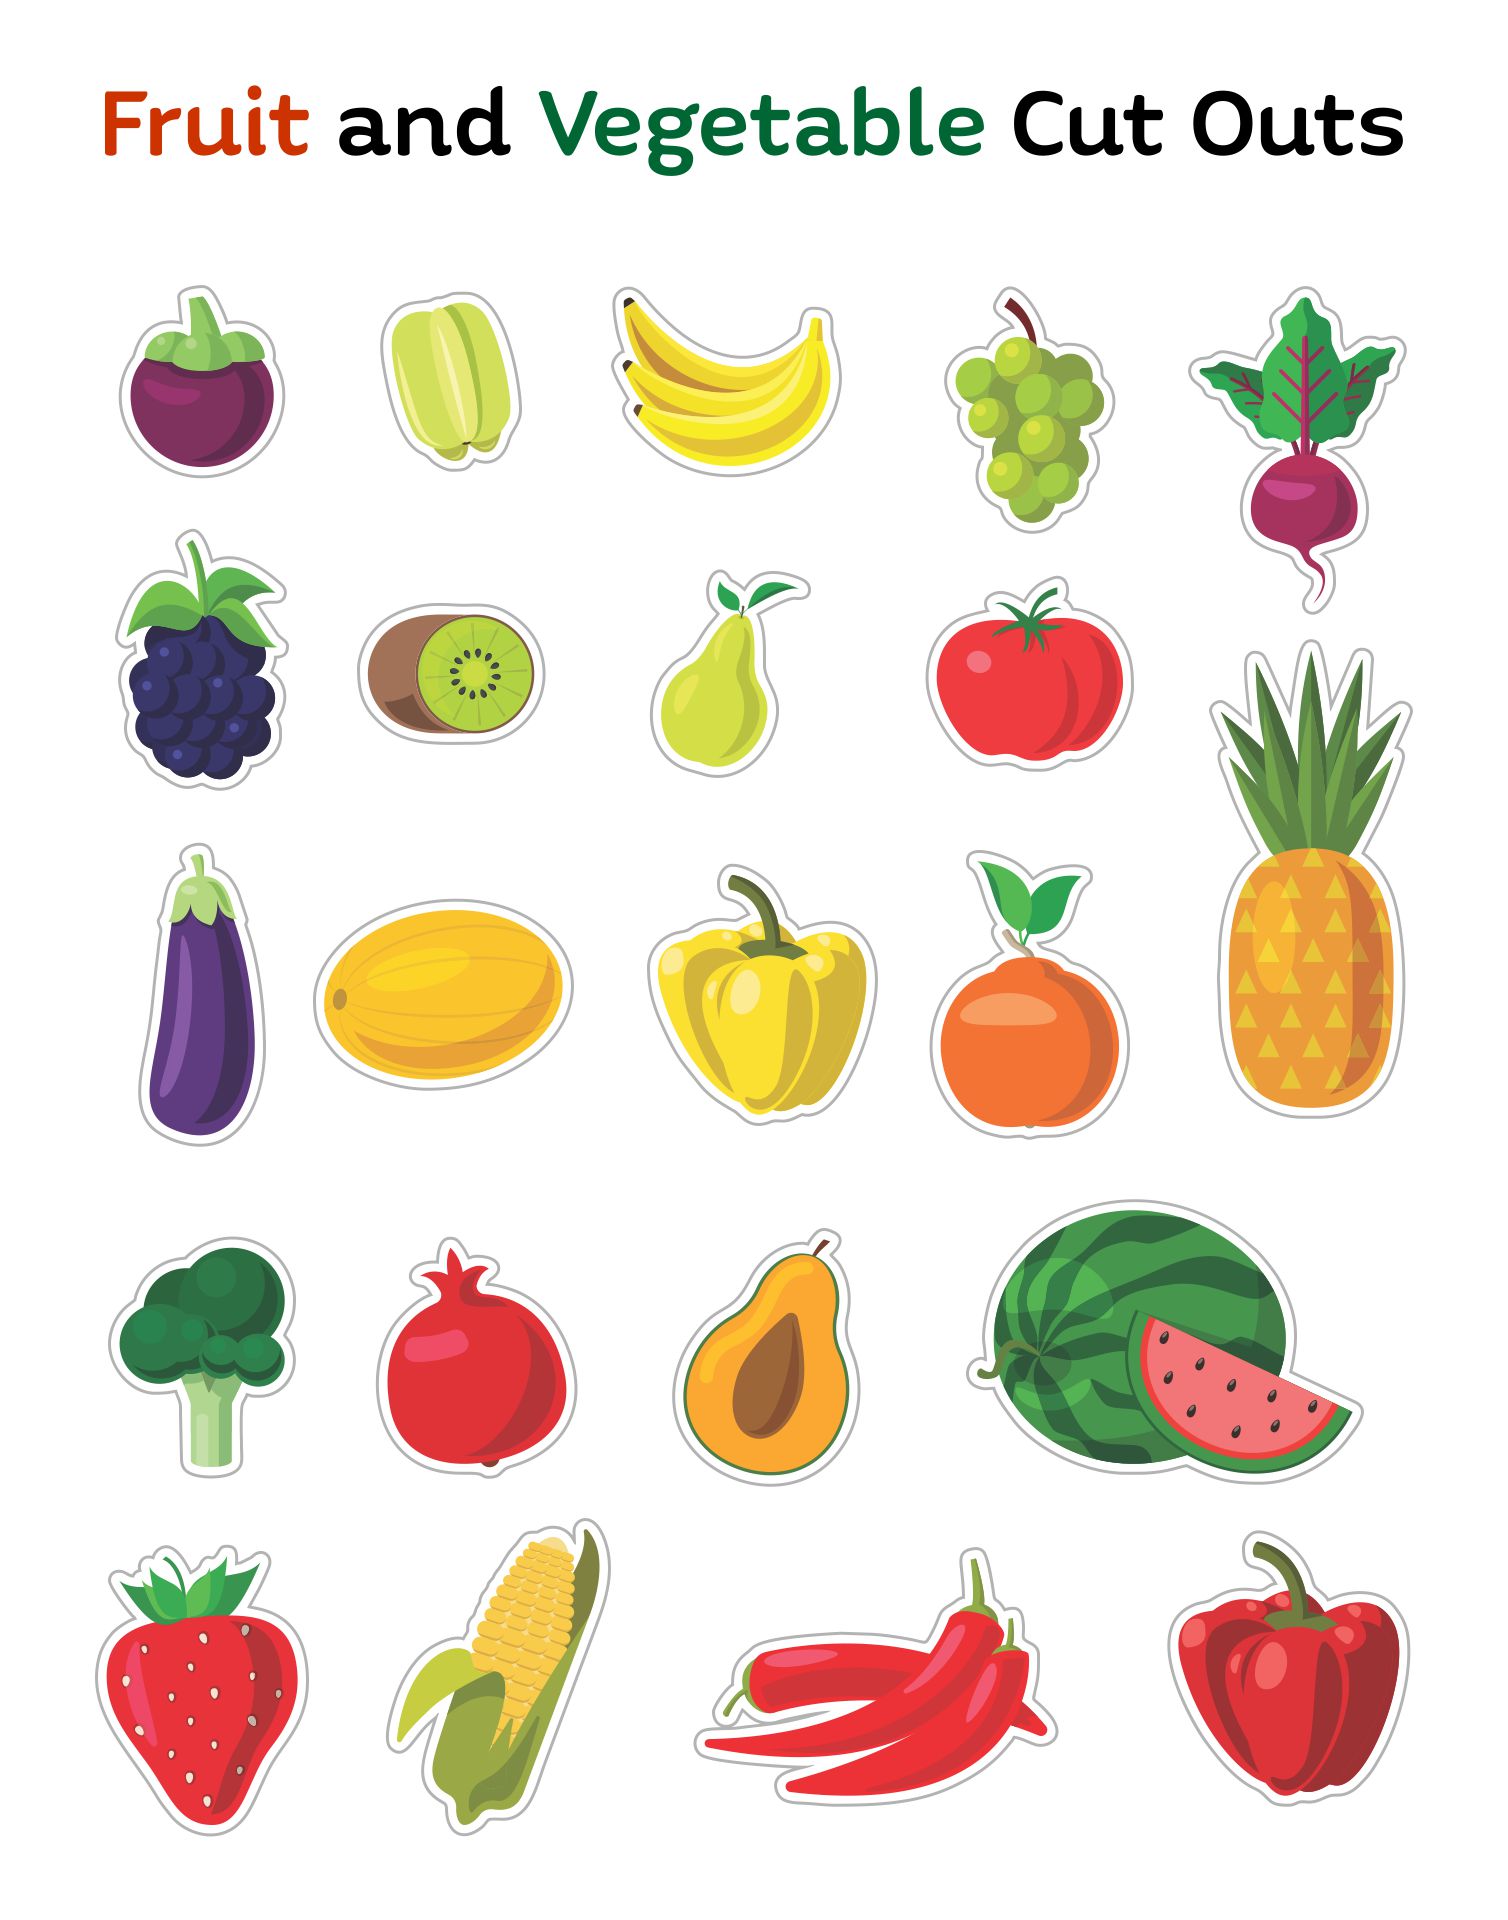 Fruit and Vegetable Cut Outs